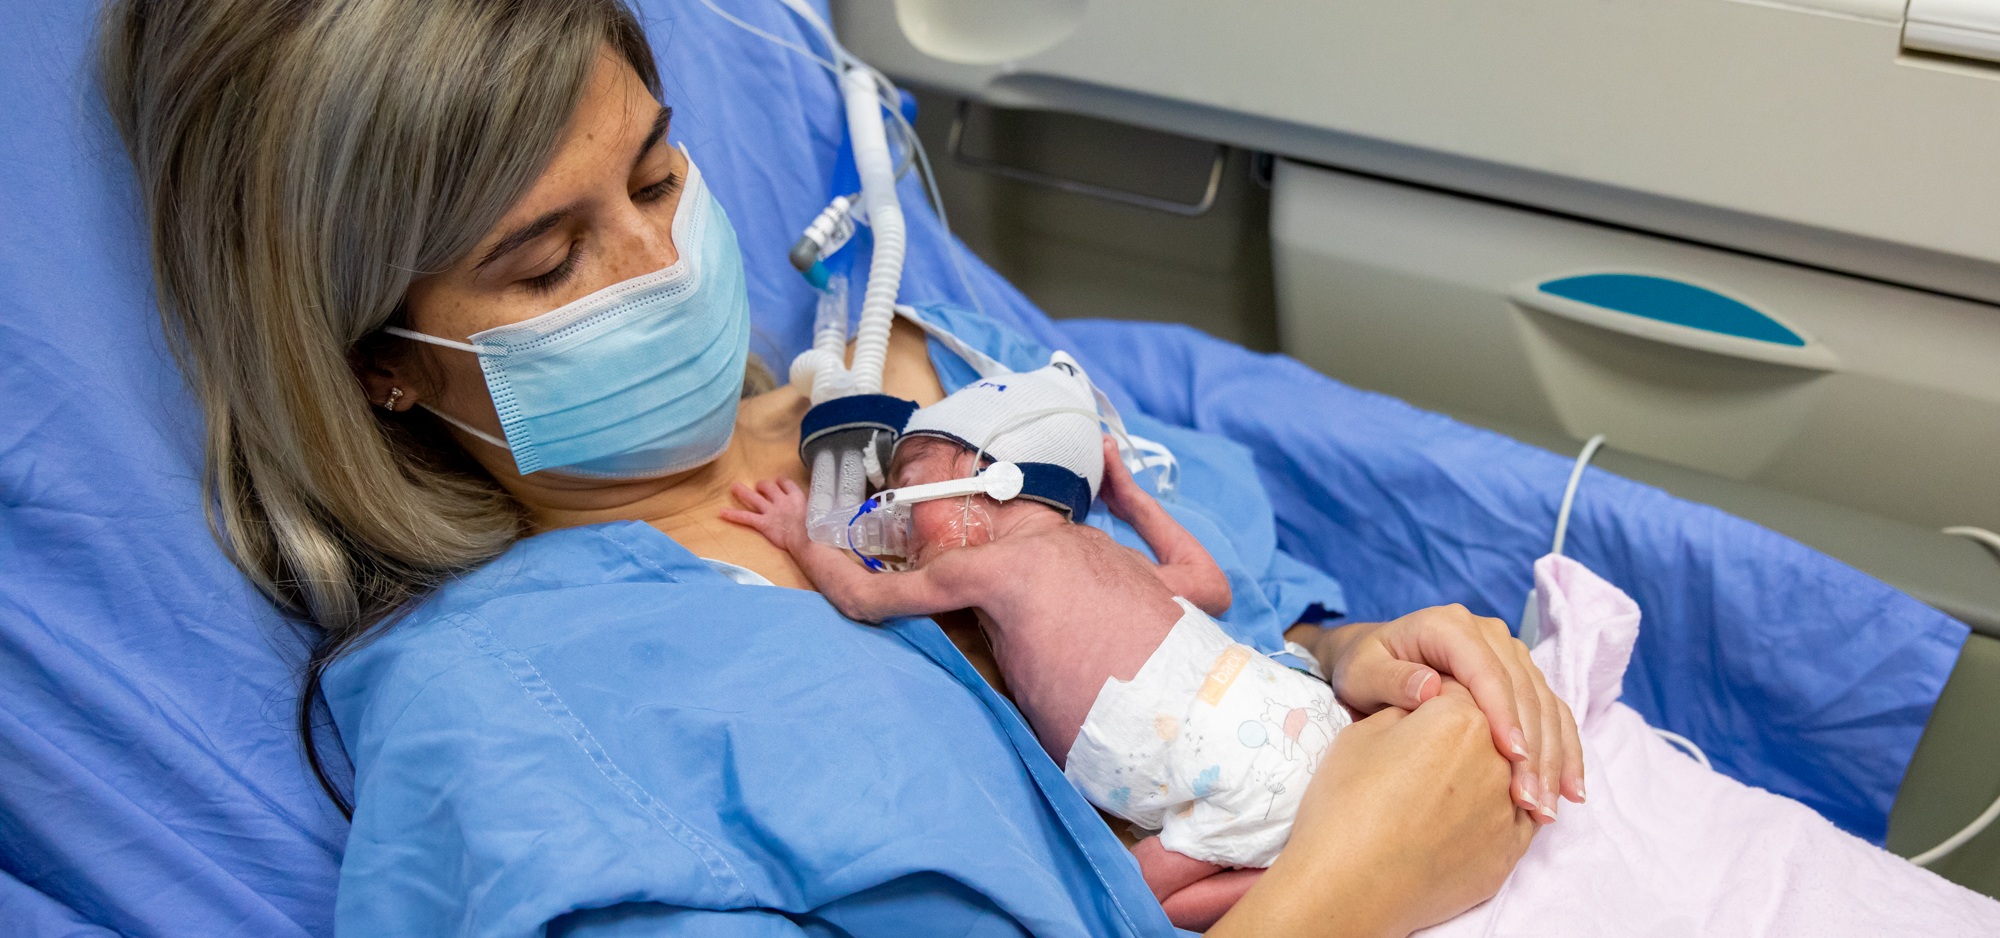 Research examines the impact of COVID-19 restrictions on parental participation in NICUs